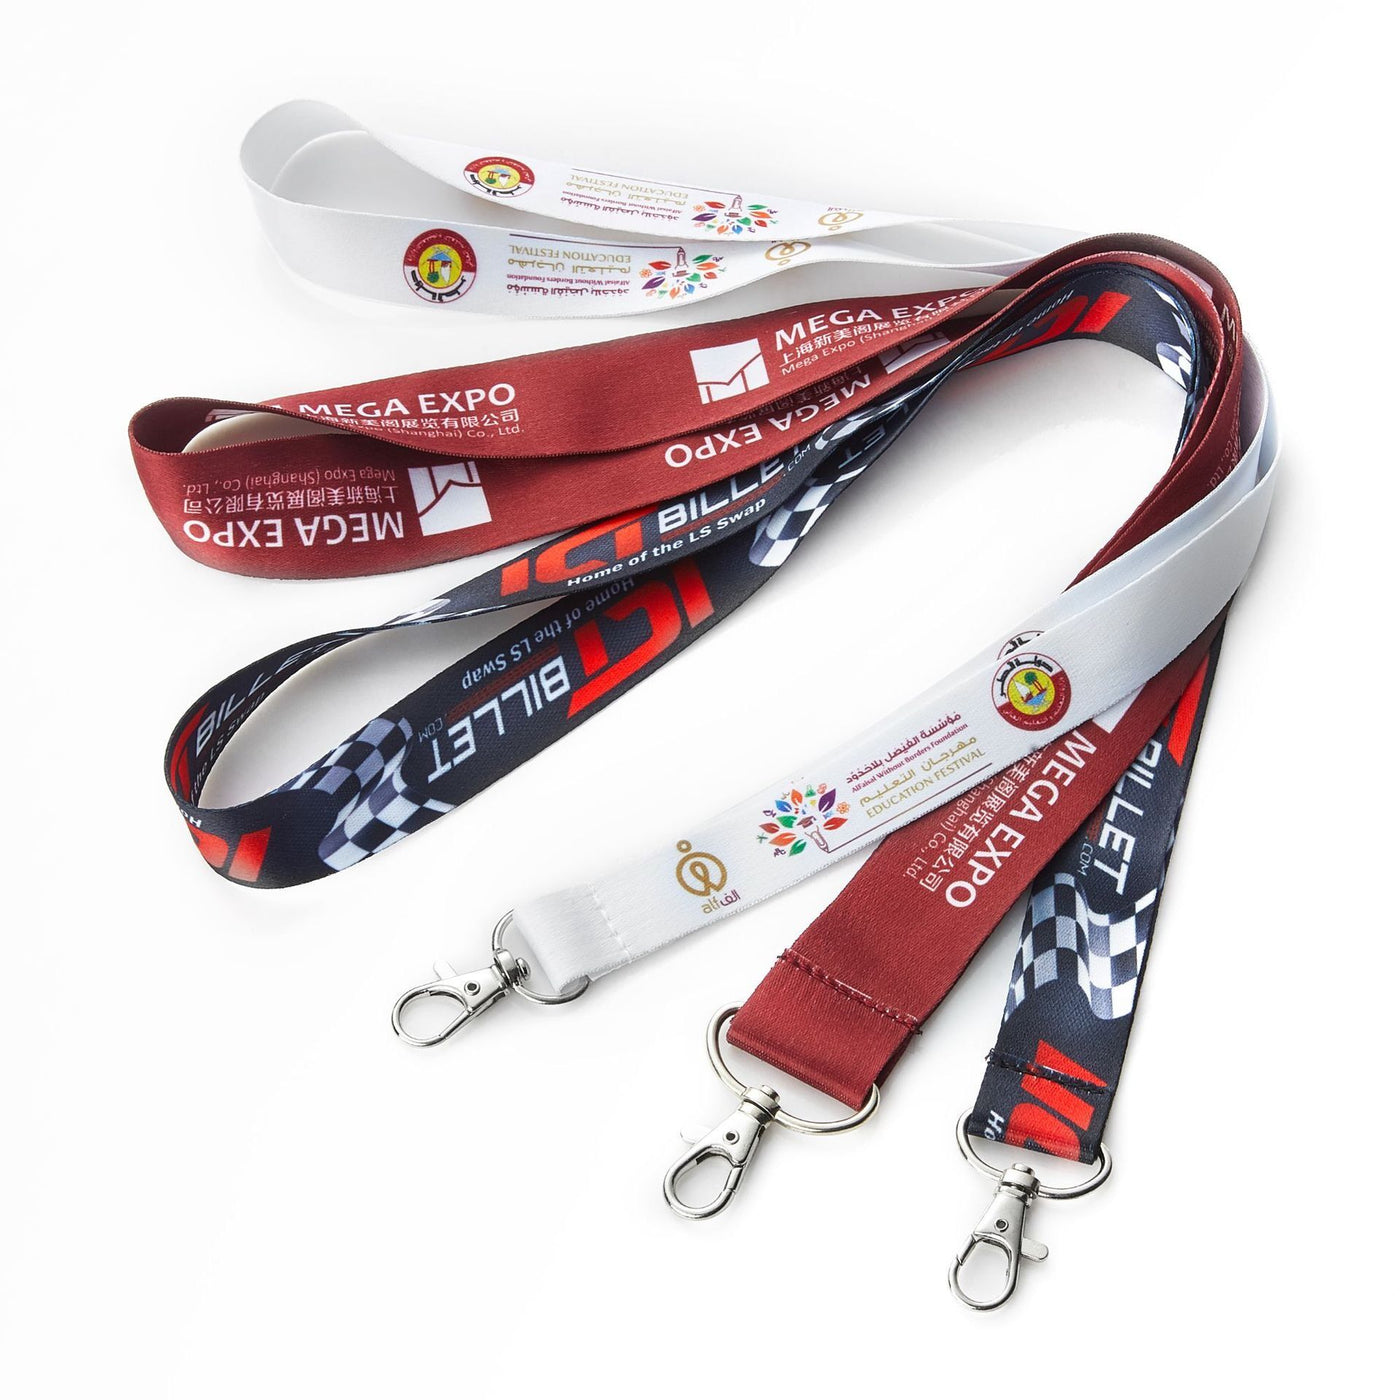 Custom Full Color Dye Dublimation Lanyards For Luggage Tag and ID Card